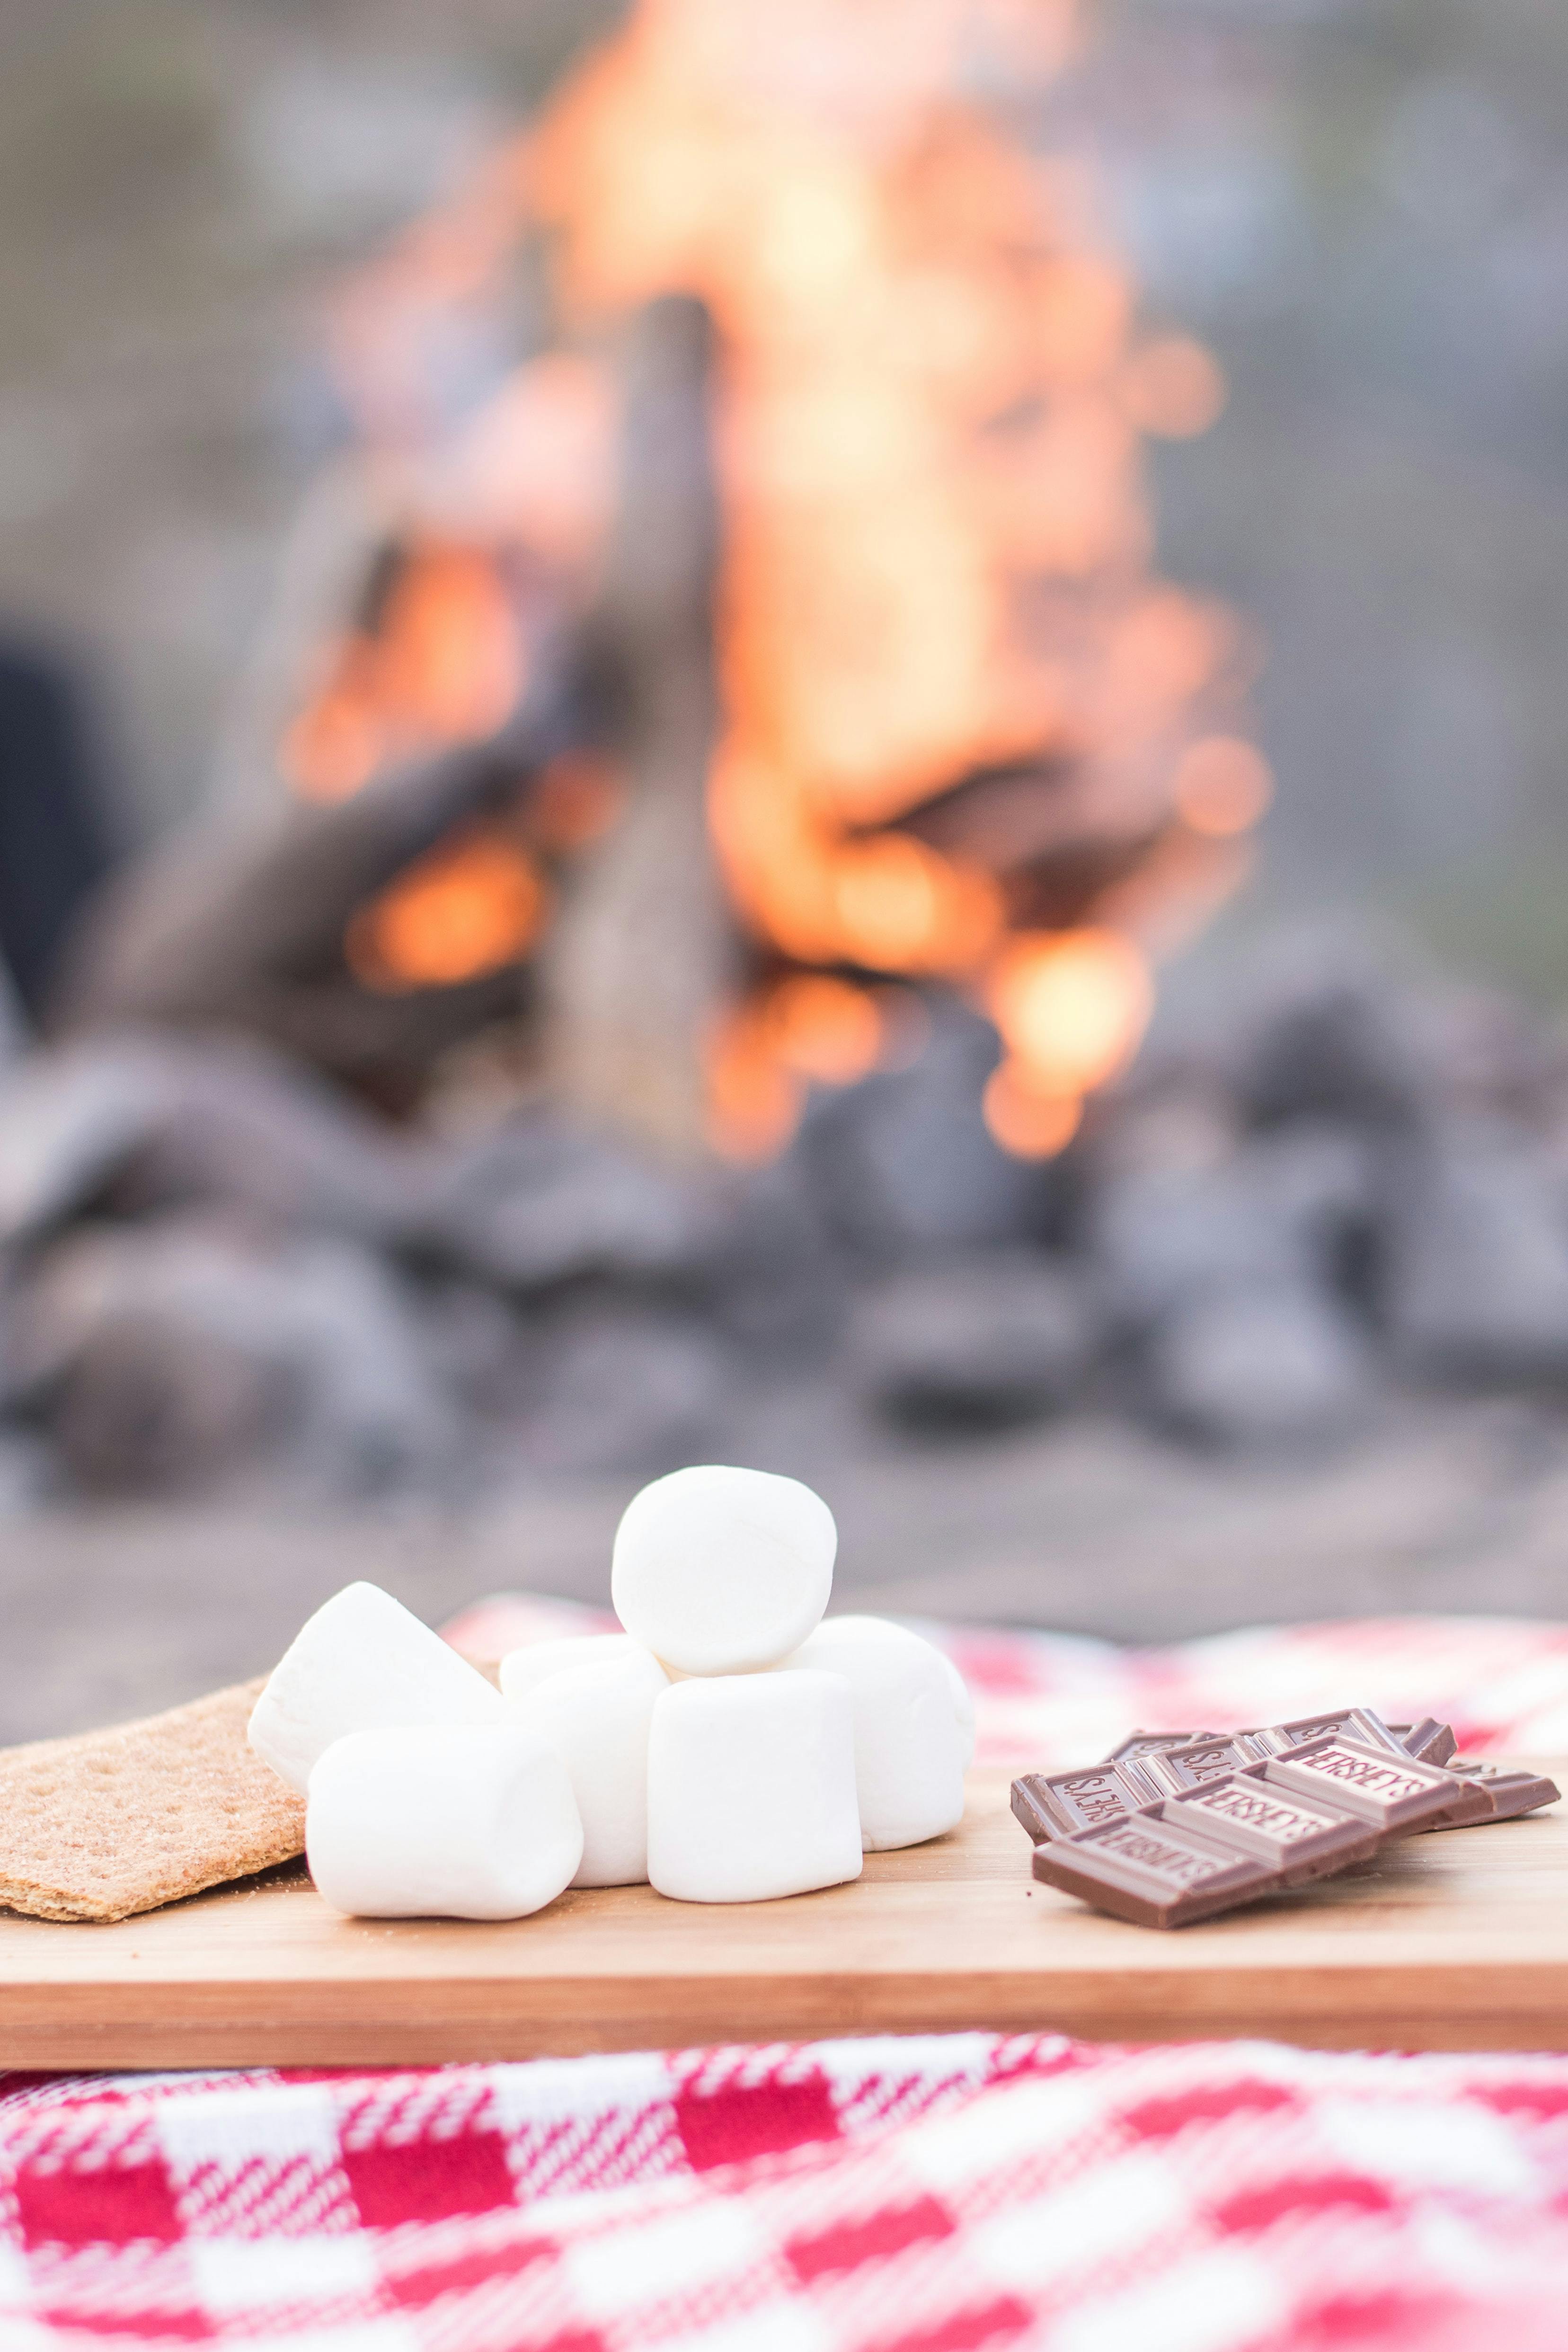 Smores sit on a cutting board.